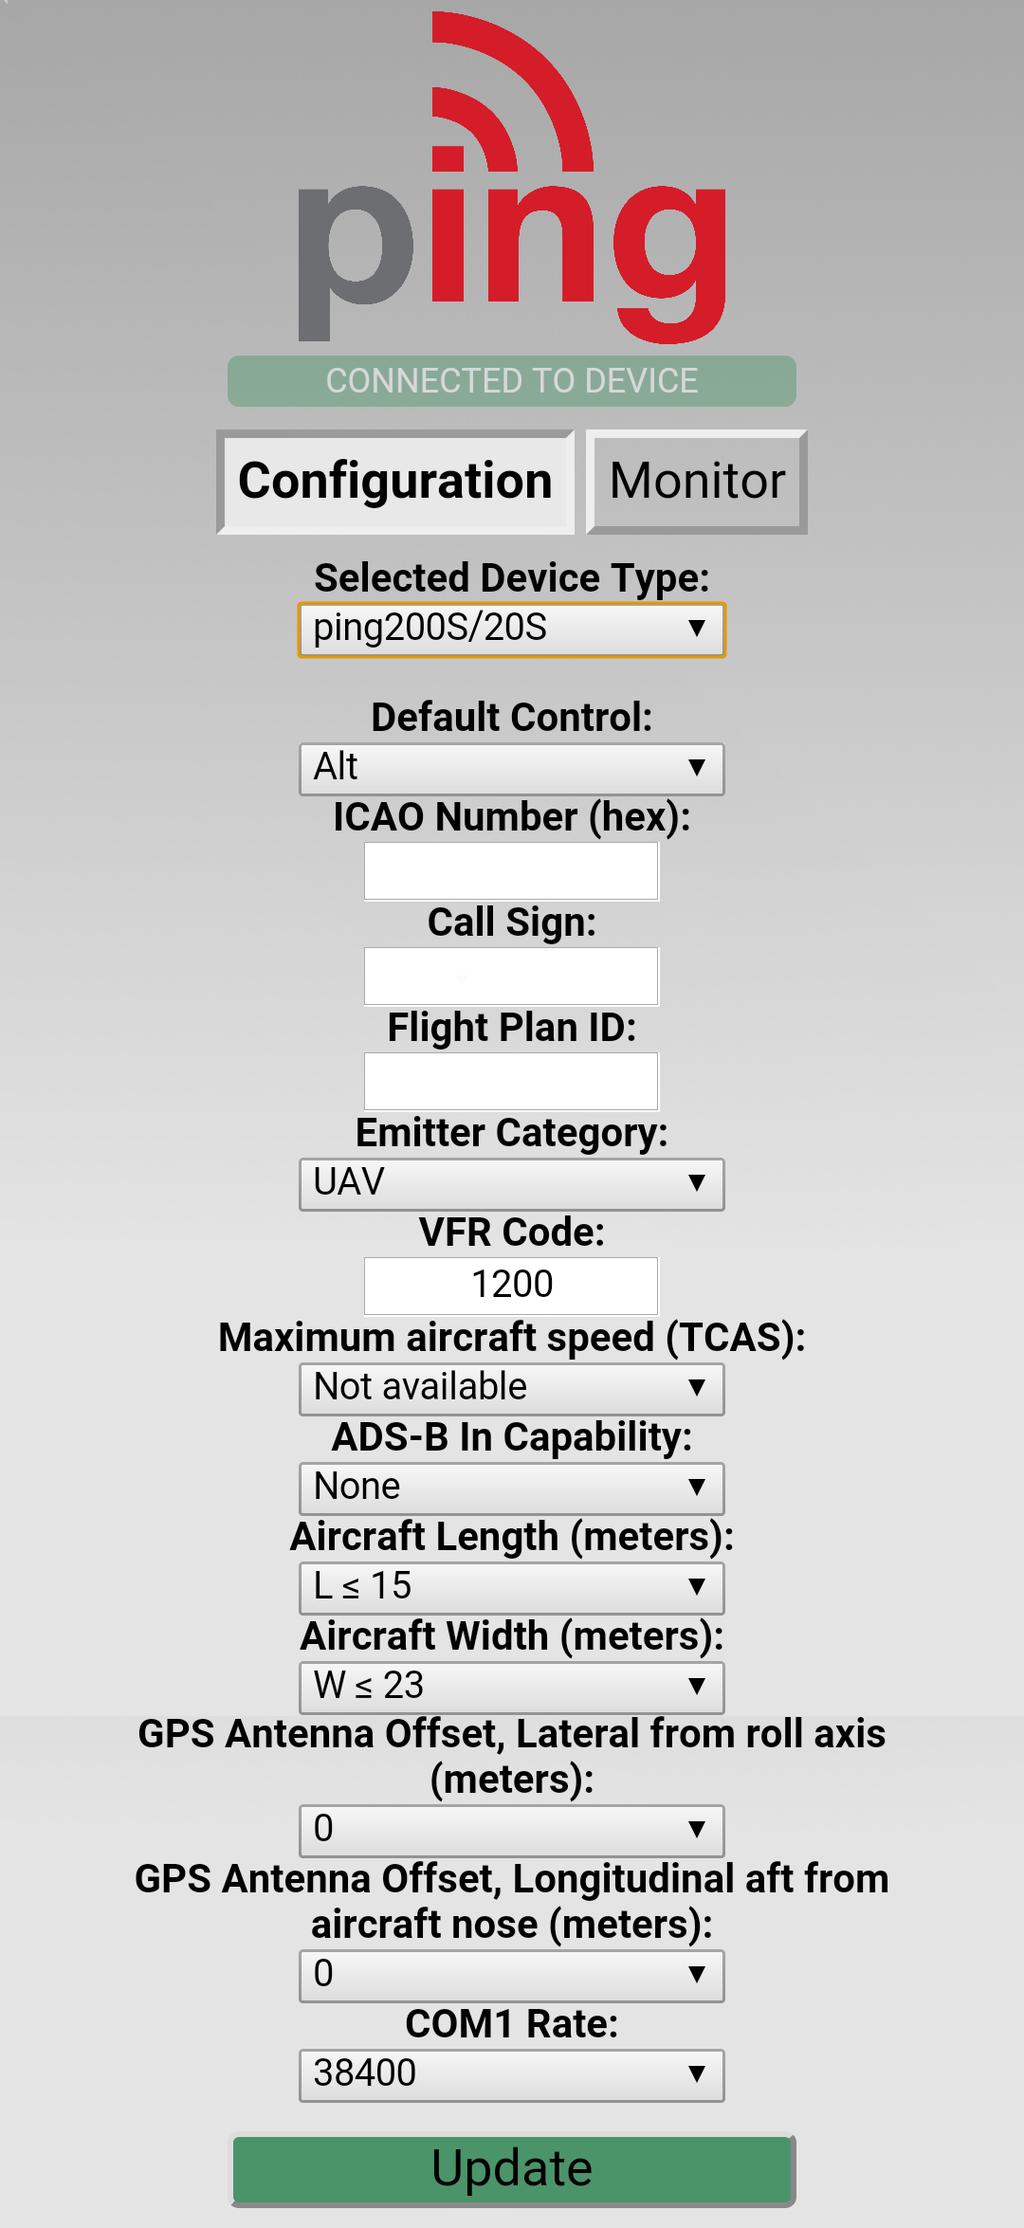 Configure ping200s/20s 5 200s/20s launch the uavionix Ping application and complete the fields as required for your device/aircraft.